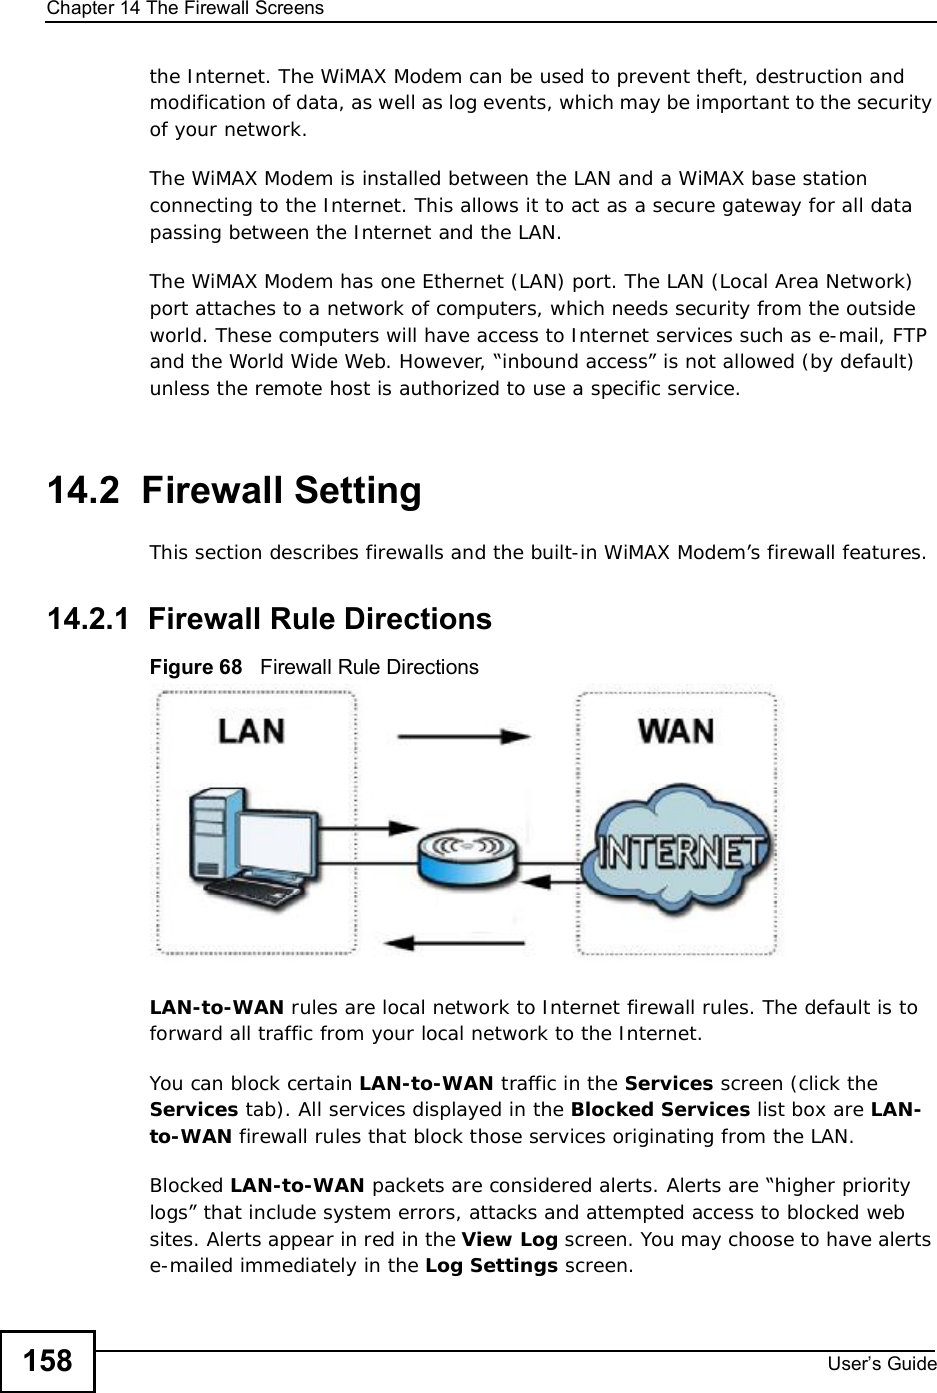 Chapter 14The Firewall ScreensUser s Guide158the Internet. The WiMAX Modem can be used to prevent theft, destruction and modification of data, as well as log events, which may be important to the security of your network. The WiMAX Modem is installed between the LAN and a WiMAX base station connecting to the Internet. This allows it to act as a secure gateway for all data passing between the Internet and the LAN.The WiMAX Modem has one Ethernet (LAN) port. The LAN (Local Area Network) port attaches to a network of computers, which needs security from the outside world. These computers will have access to Internet services such as e-mail, FTP and the World Wide Web. However, “inbound access” is not allowed (by default) unless the remote host is authorized to use a specific service.14.2  Firewall SettingThis section describes firewalls and the built-in WiMAX Modem’s firewall features.14.2.1  Firewall Rule DirectionsFigure 68   Firewall Rule DirectionsLAN-to-WAN rules are local network to Internet firewall rules. The default is to forward all traffic from your local network to the Internet. You can block certain LAN-to-WAN traffic in the Services screen (click the Services tab). All services displayed in the Blocked Services list box are LAN-to-WAN firewall rules that block those services originating from the LAN. Blocked LAN-to-WAN packets are considered alerts. Alerts are “higher priority logs” that include system errors, attacks and attempted access to blocked web sites. Alerts appear in red in the View Log screen. You may choose to have alerts e-mailed immediately in the Log Settings screen.